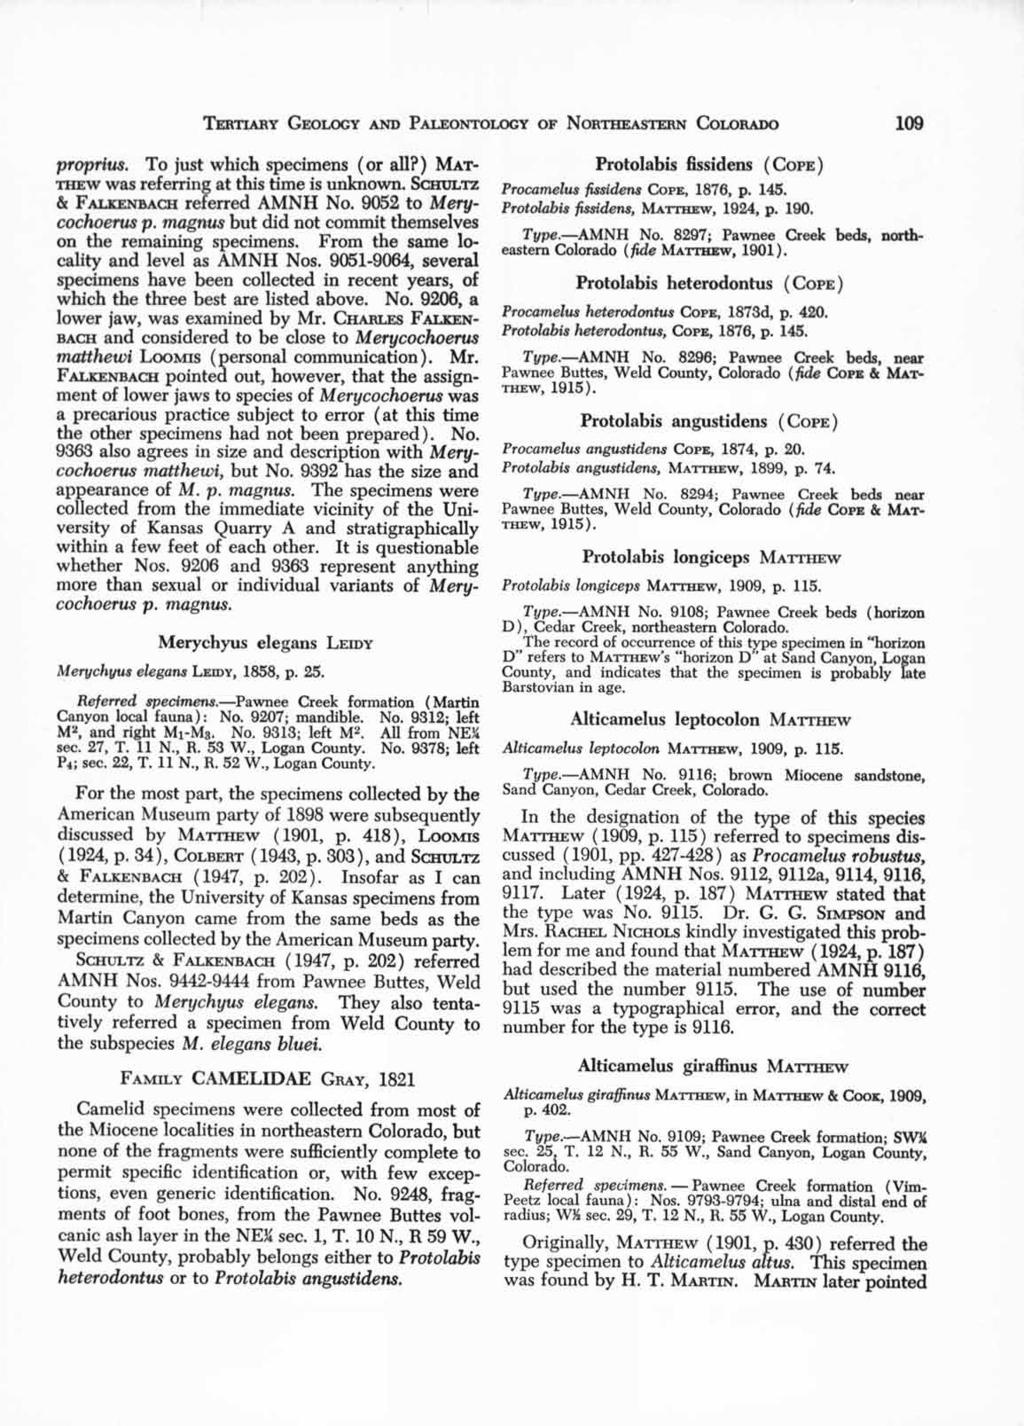 TERTIARY GEOLOGY AND PALEONTOLOGY OF NORTHEASTERN COLORADO 109 proprius. To just which specimens ( or all?) MAT- THEW was referring at this time is unknown. SC:HULTZ & FALKENBACH referred AMNH No.